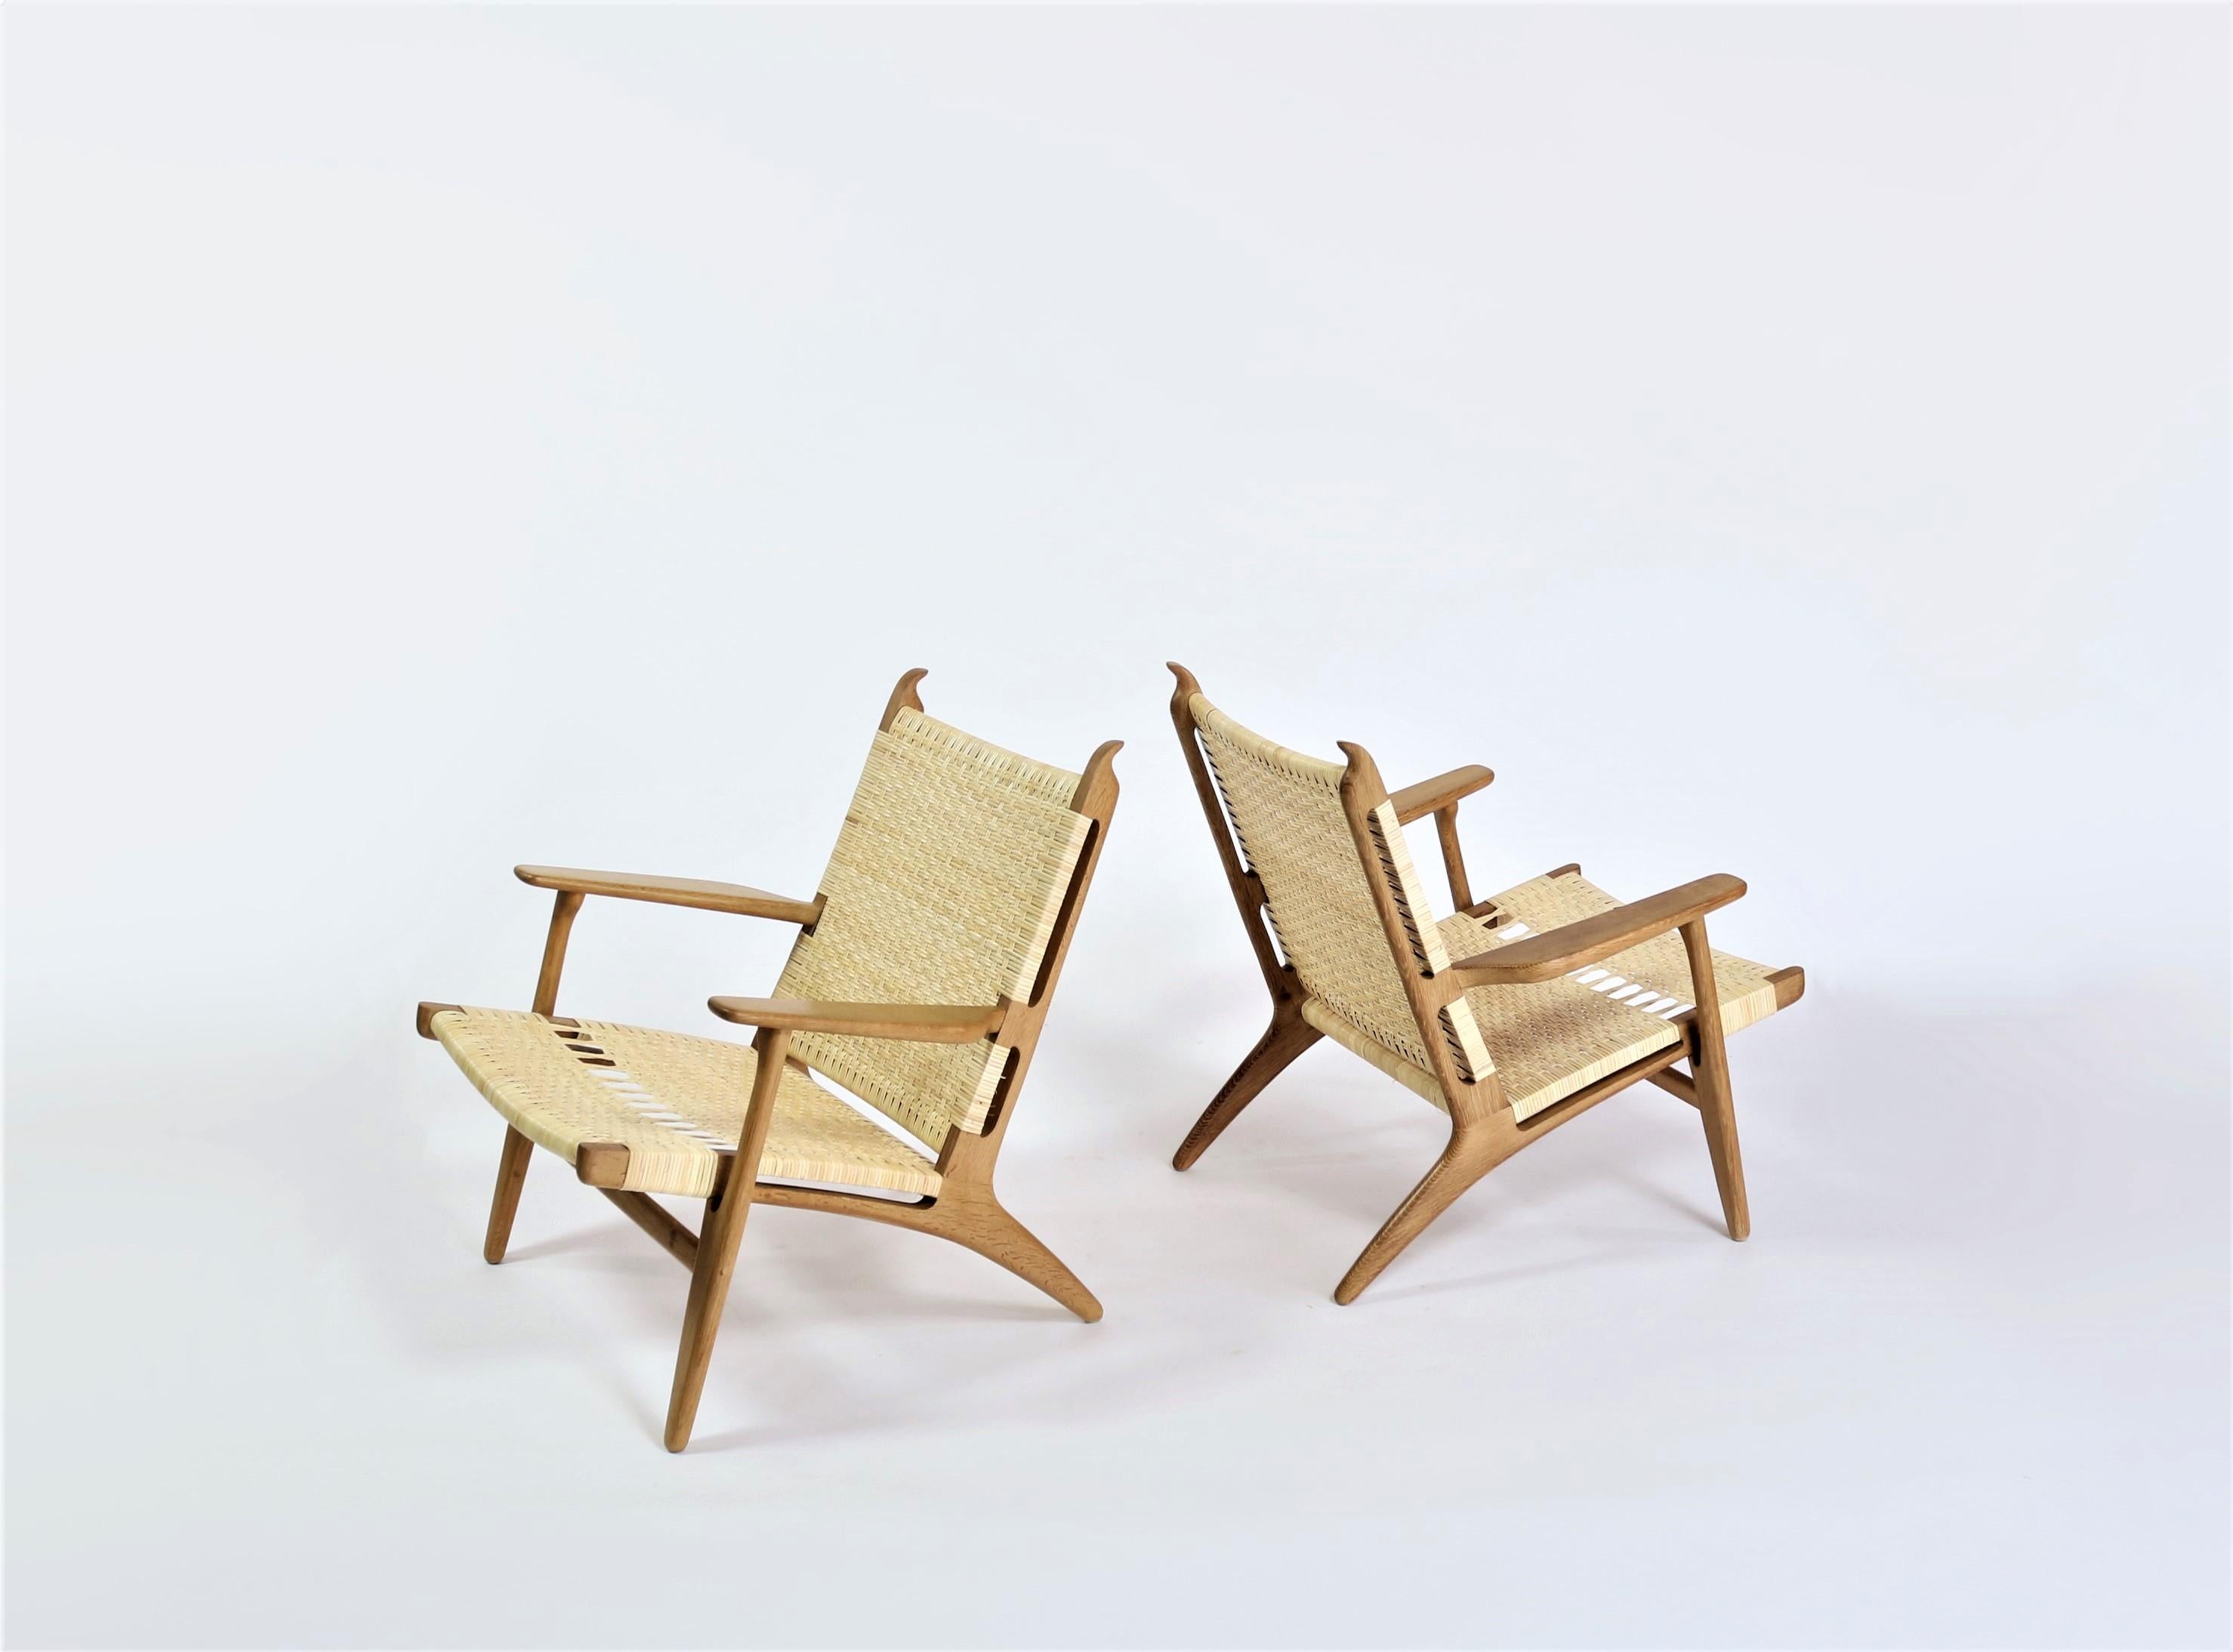 Stunning and rare pair of Danish modern lounge chairs from the 1950s by Hans J. Wegner. Model 